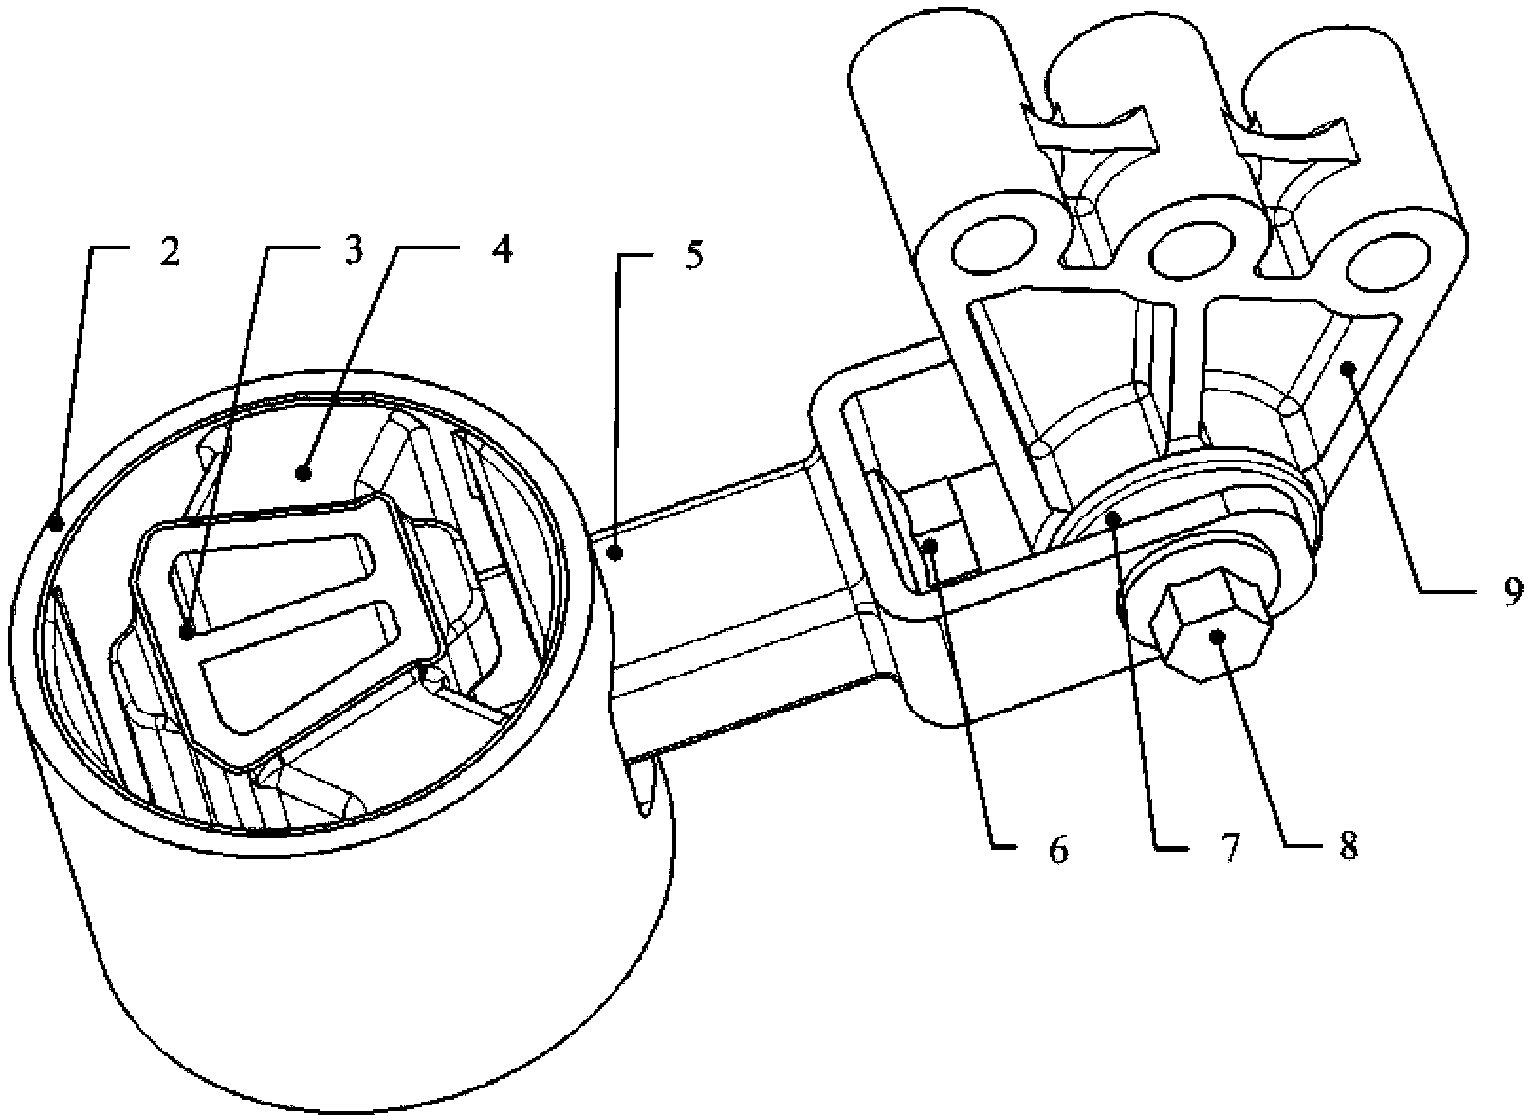 Torsion resistant suspension of automobile power assembly and automobile